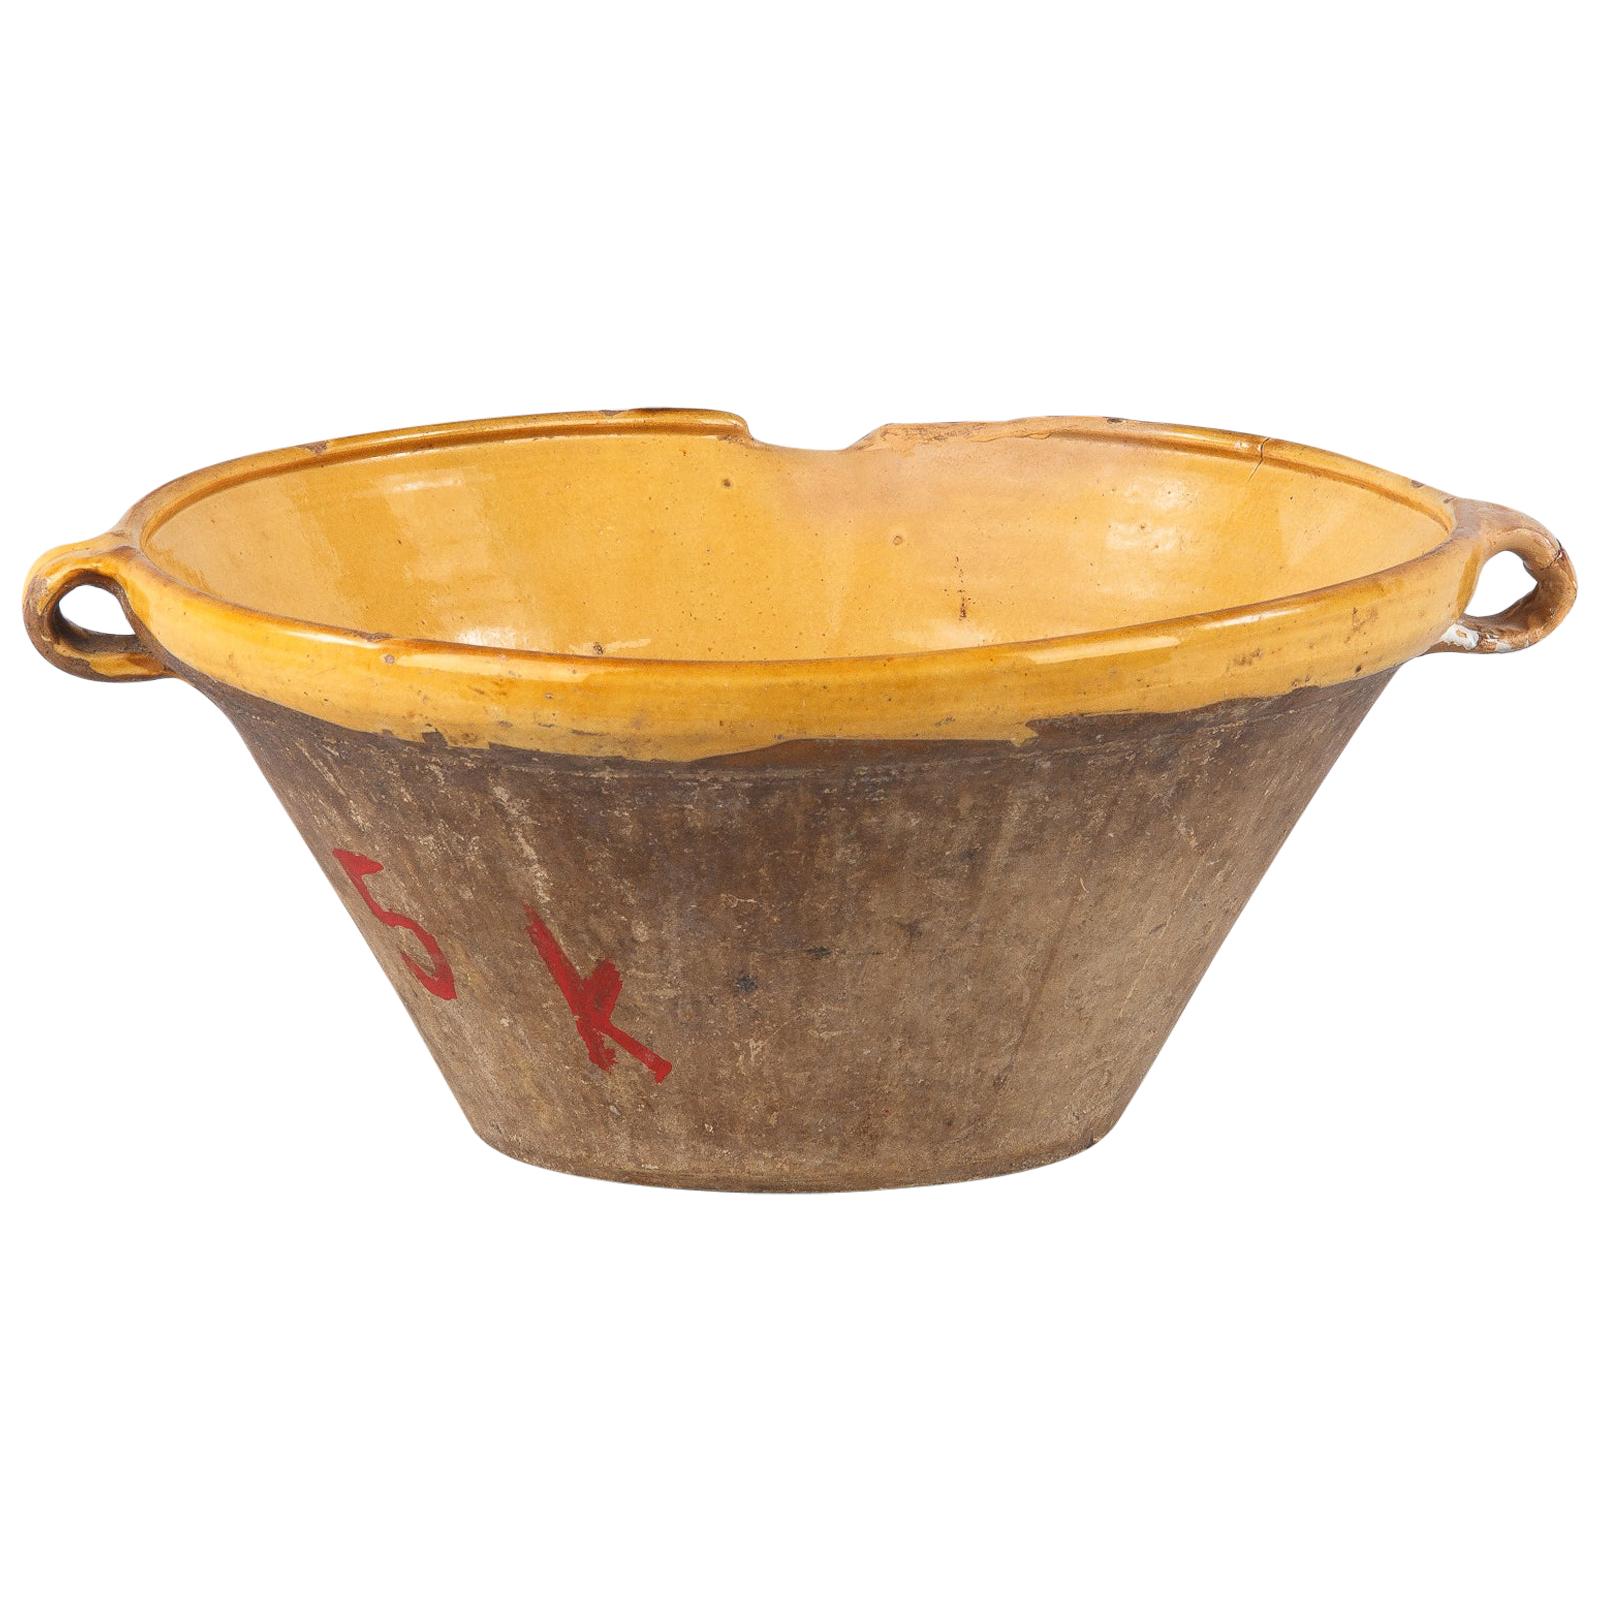 French Terracotta "Tian" Serving Dish or Bowl, Late 1800s